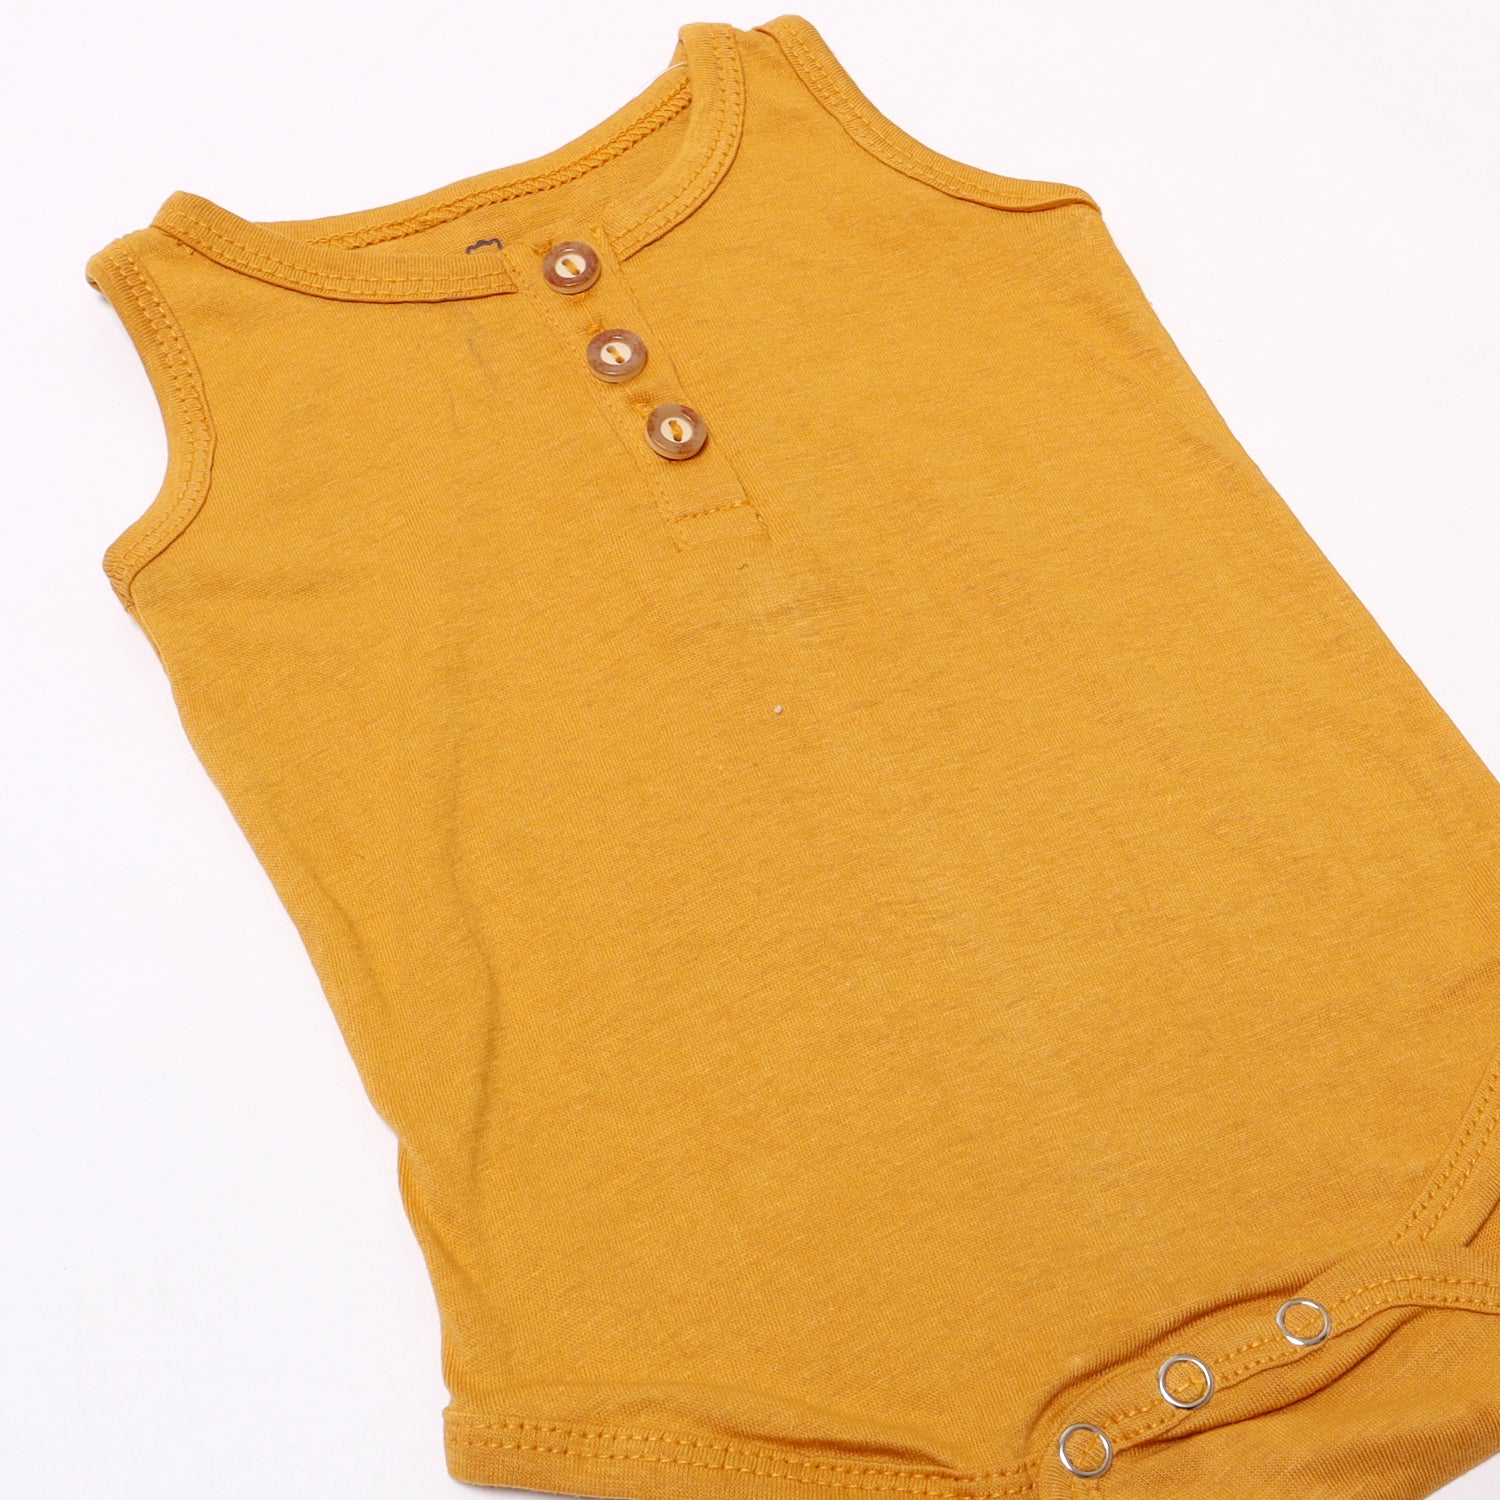 NEW MUSTARD PLAIN SLEEVES LESS WITH BUTTONS ROMPER